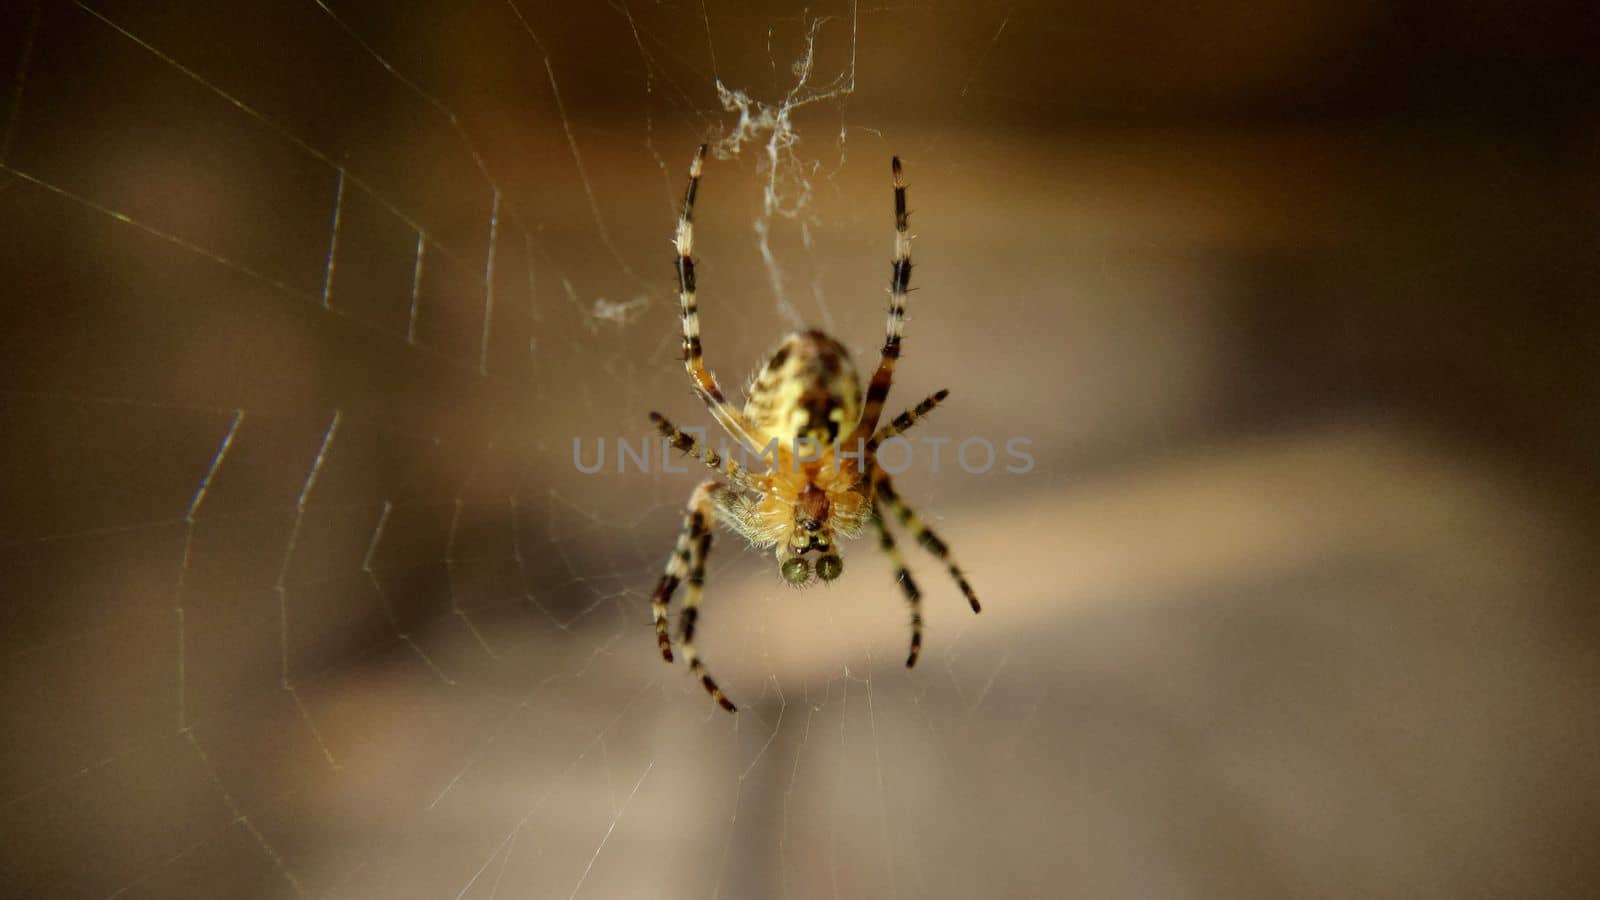 A garden spider with green eyes hanging on a web by Mastak80